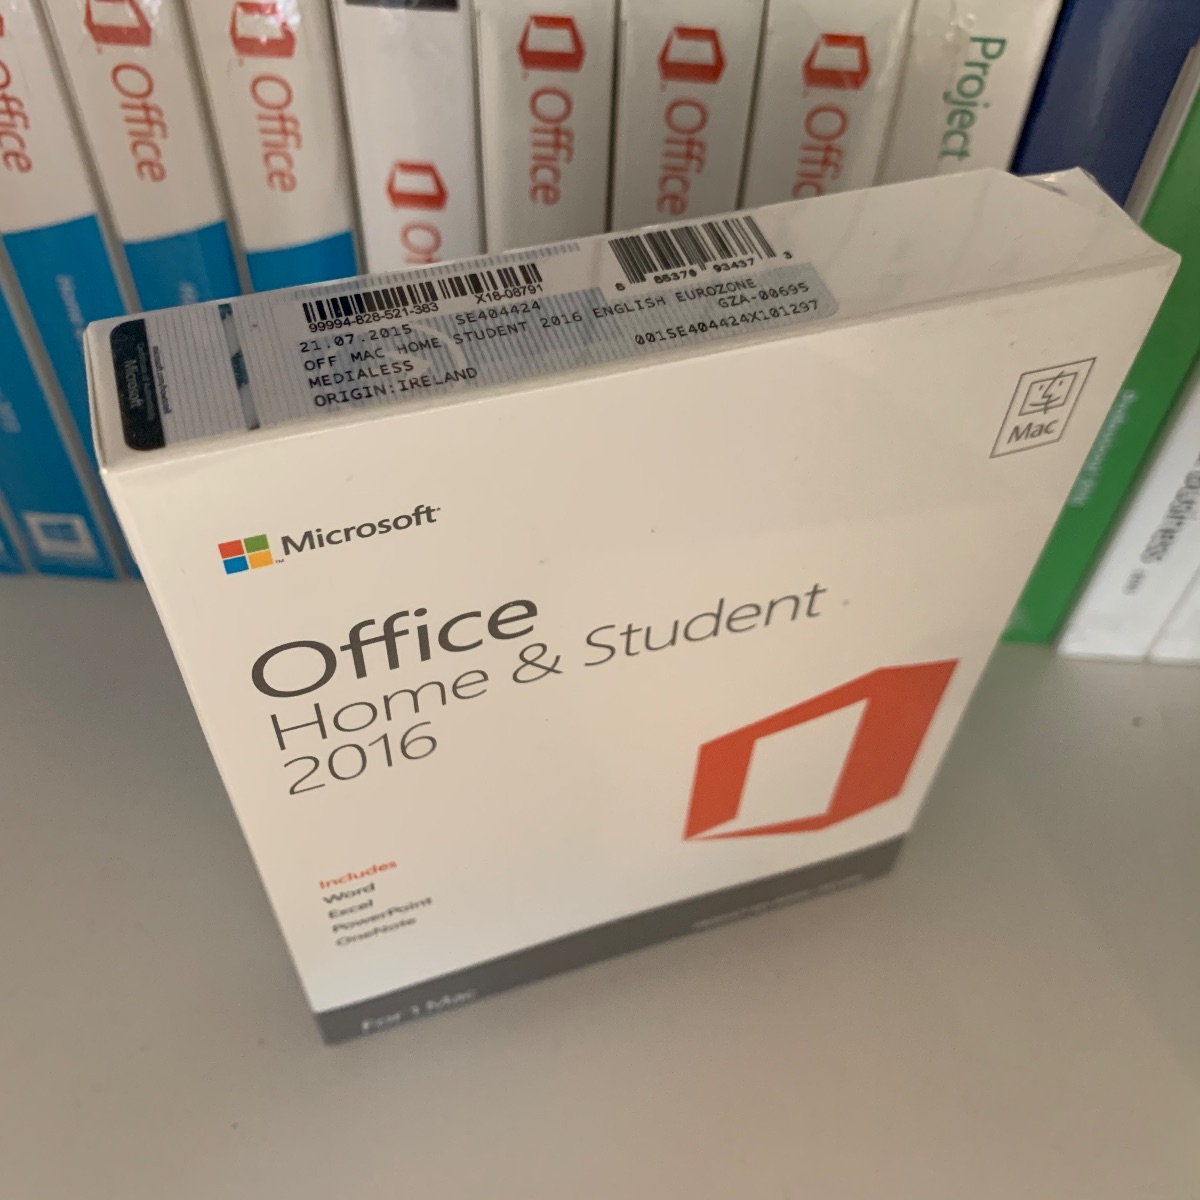 Microsoft Office 2016 Home Student 1 MAC - Word, Excel, PowerPoint 100% Genuine GZA-00695 885370934373 (Brand New & Sealed)